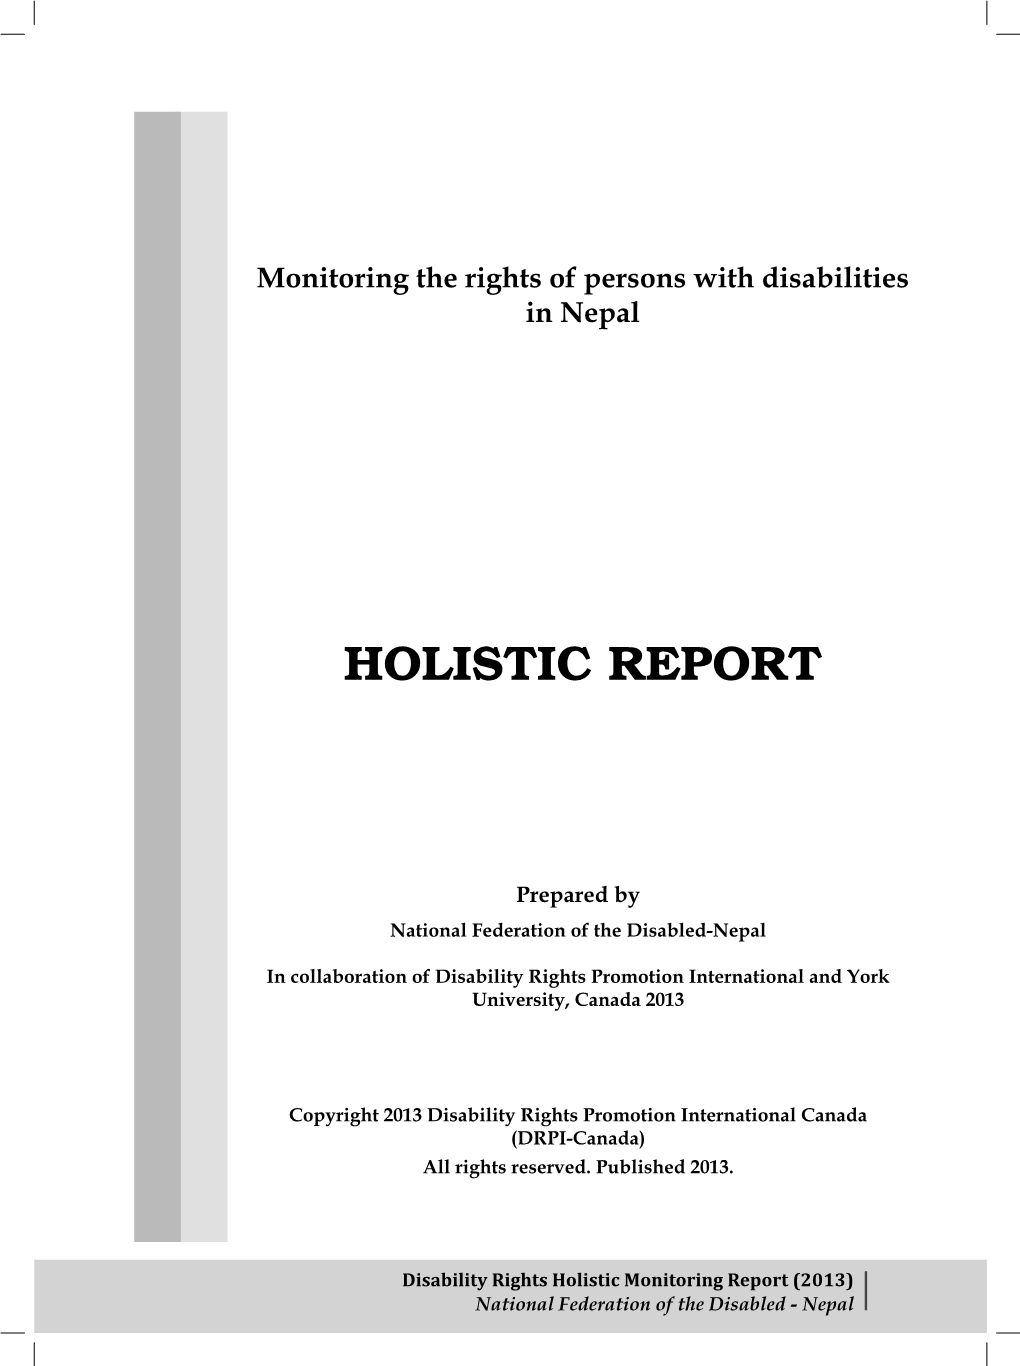 Monitoring the Rights of Persons with Disabilities in Nepal